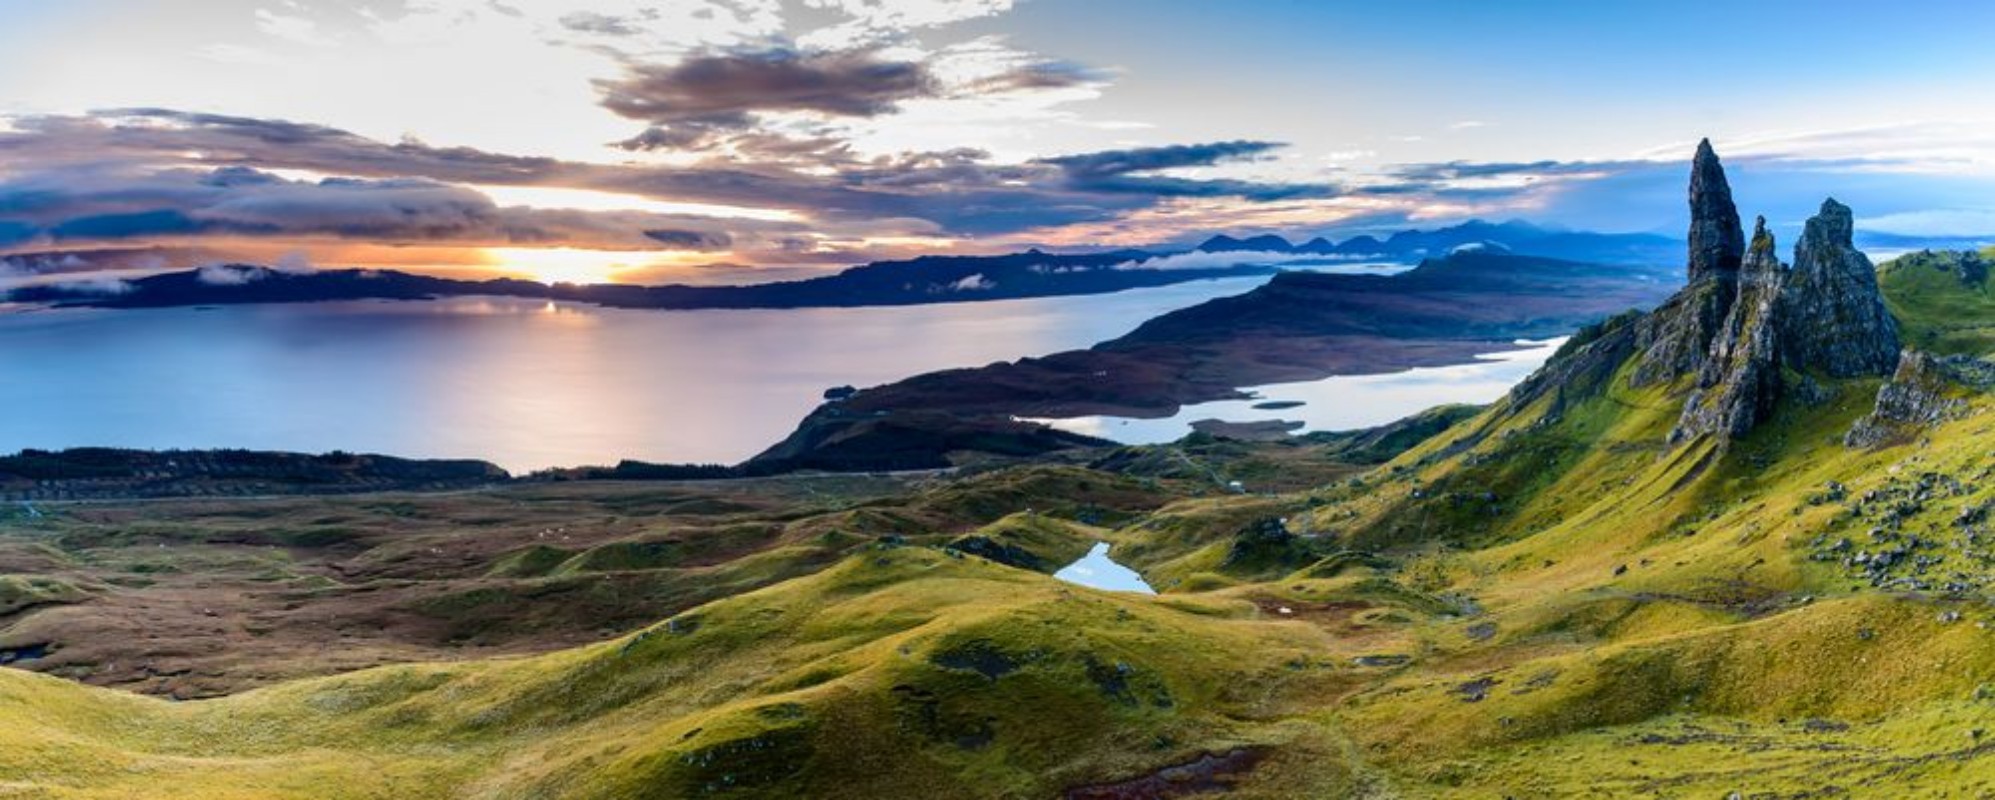 Afbeeldingen van Sunrise at the most popular location on the Isle of Skye - The Old Man of Storr - beautiful panorama of an amazing scenery with vivid colors and picturesque panorama - symbolic tourist attraction